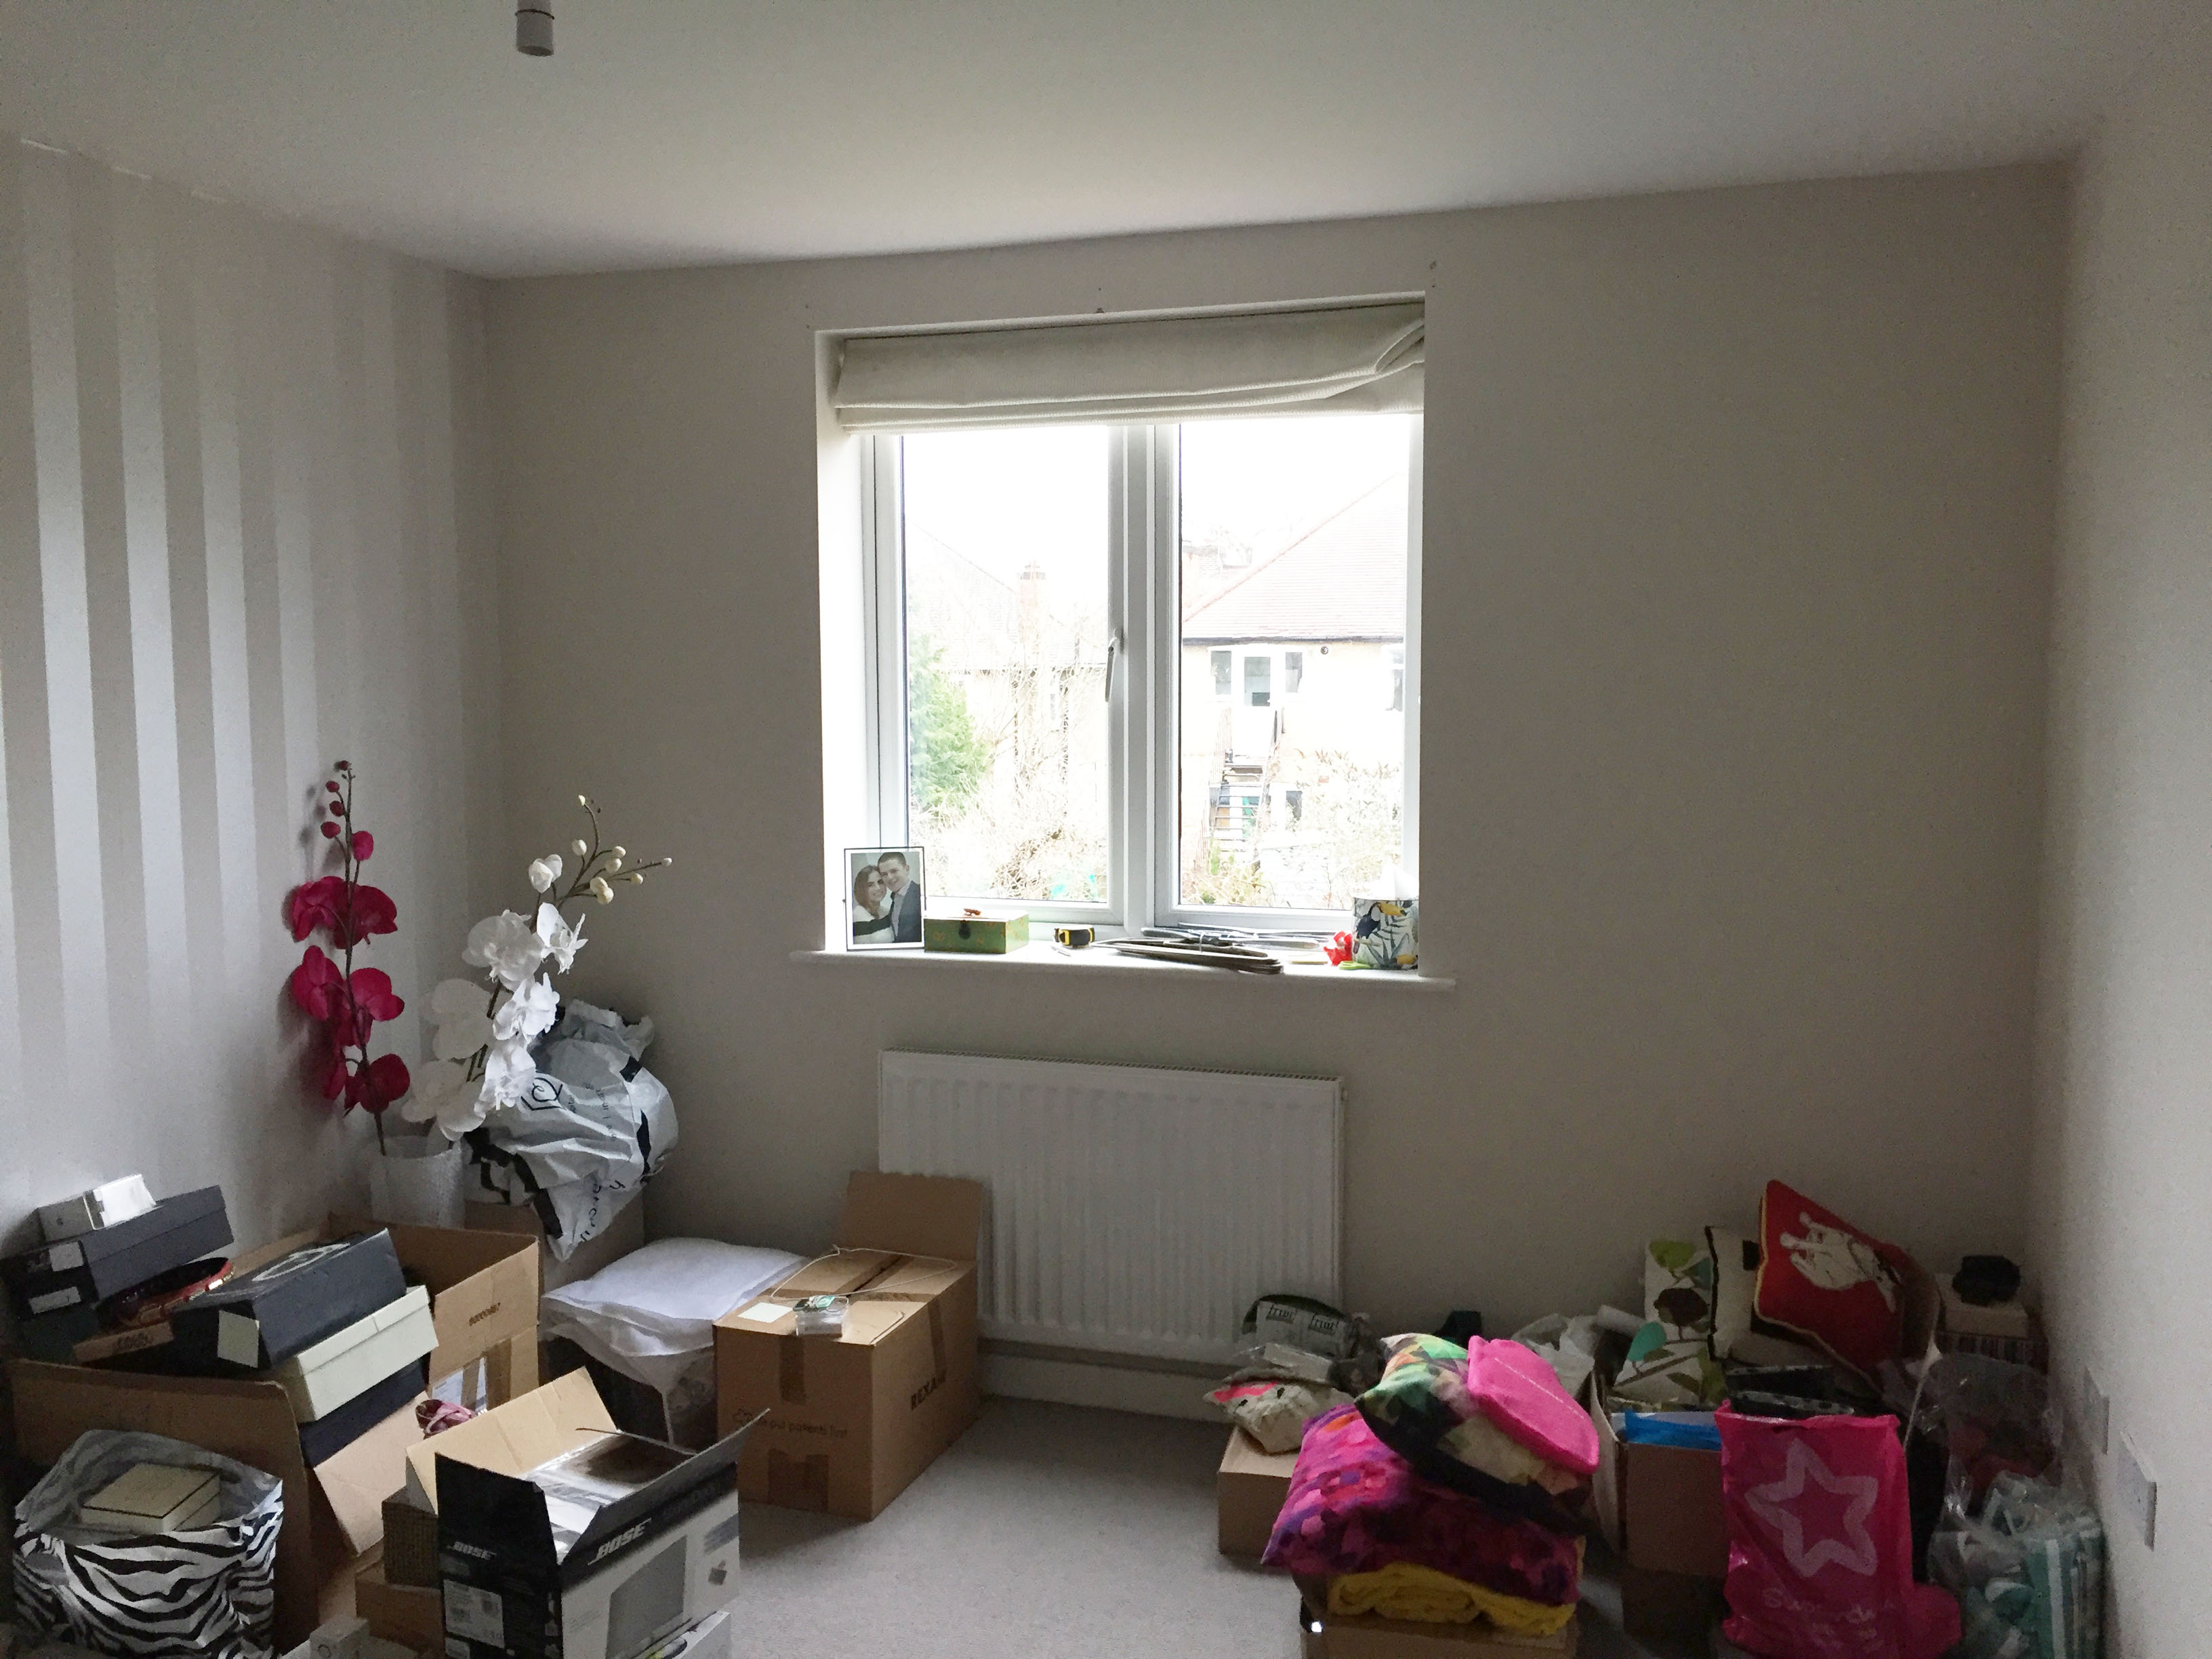 A photo of the room before the baby arrived - a spare room